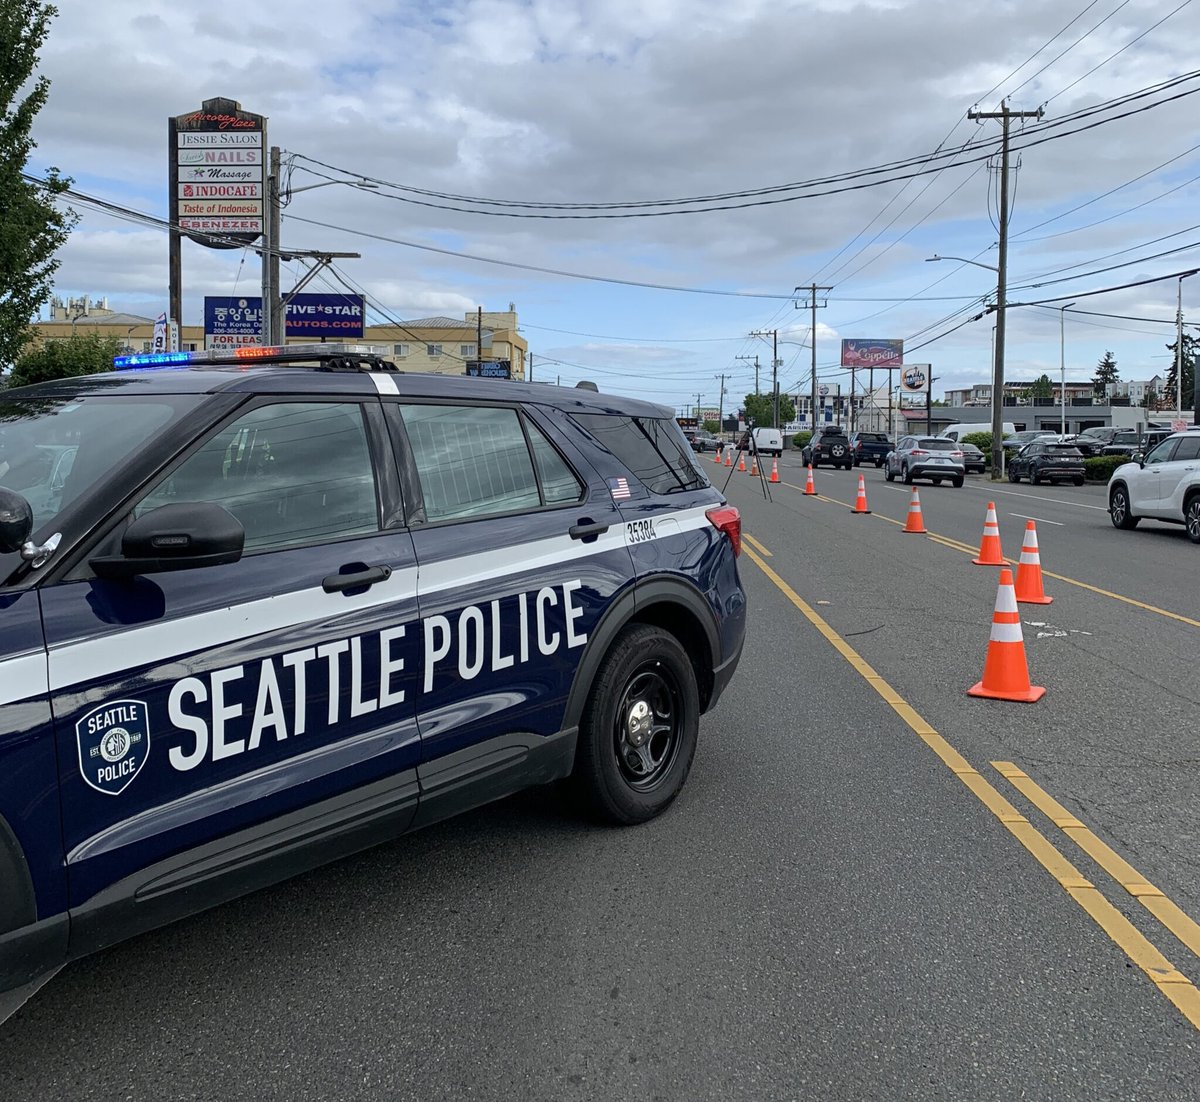 Detectives investigating fatality collision in North Seattle: Police are investigating a collision in the 13700 block of Aurora Avenue North